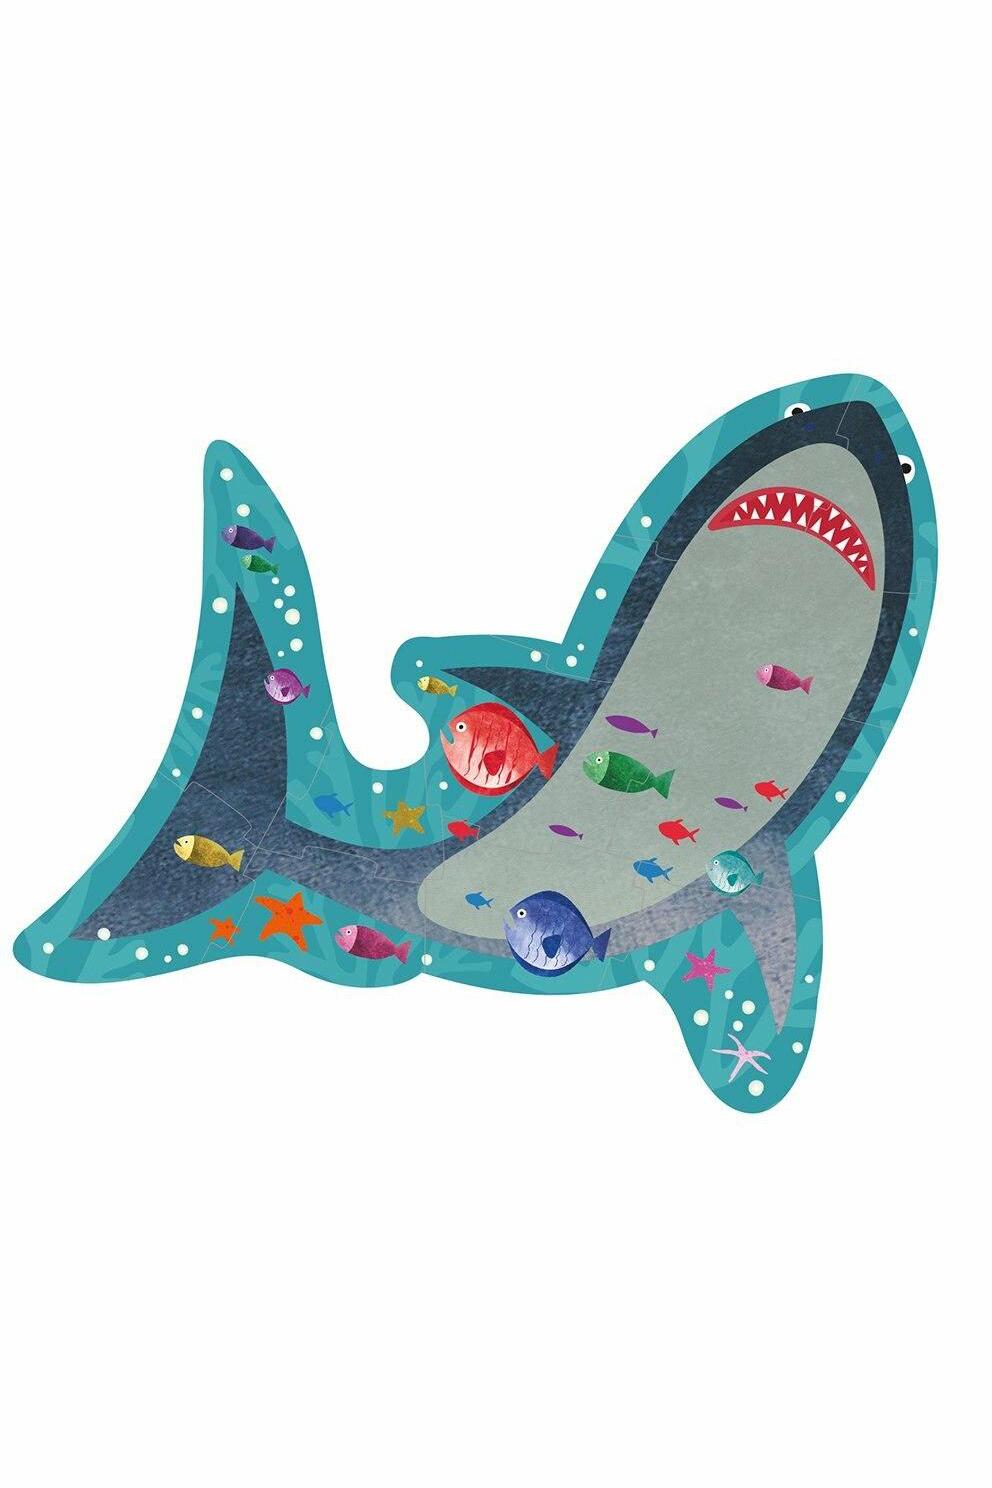 Shark 12pc Shaped Jigsaw with Shaped Box - Tea for Three: A Children's Boutique-New Arrivals-TheT43Shop